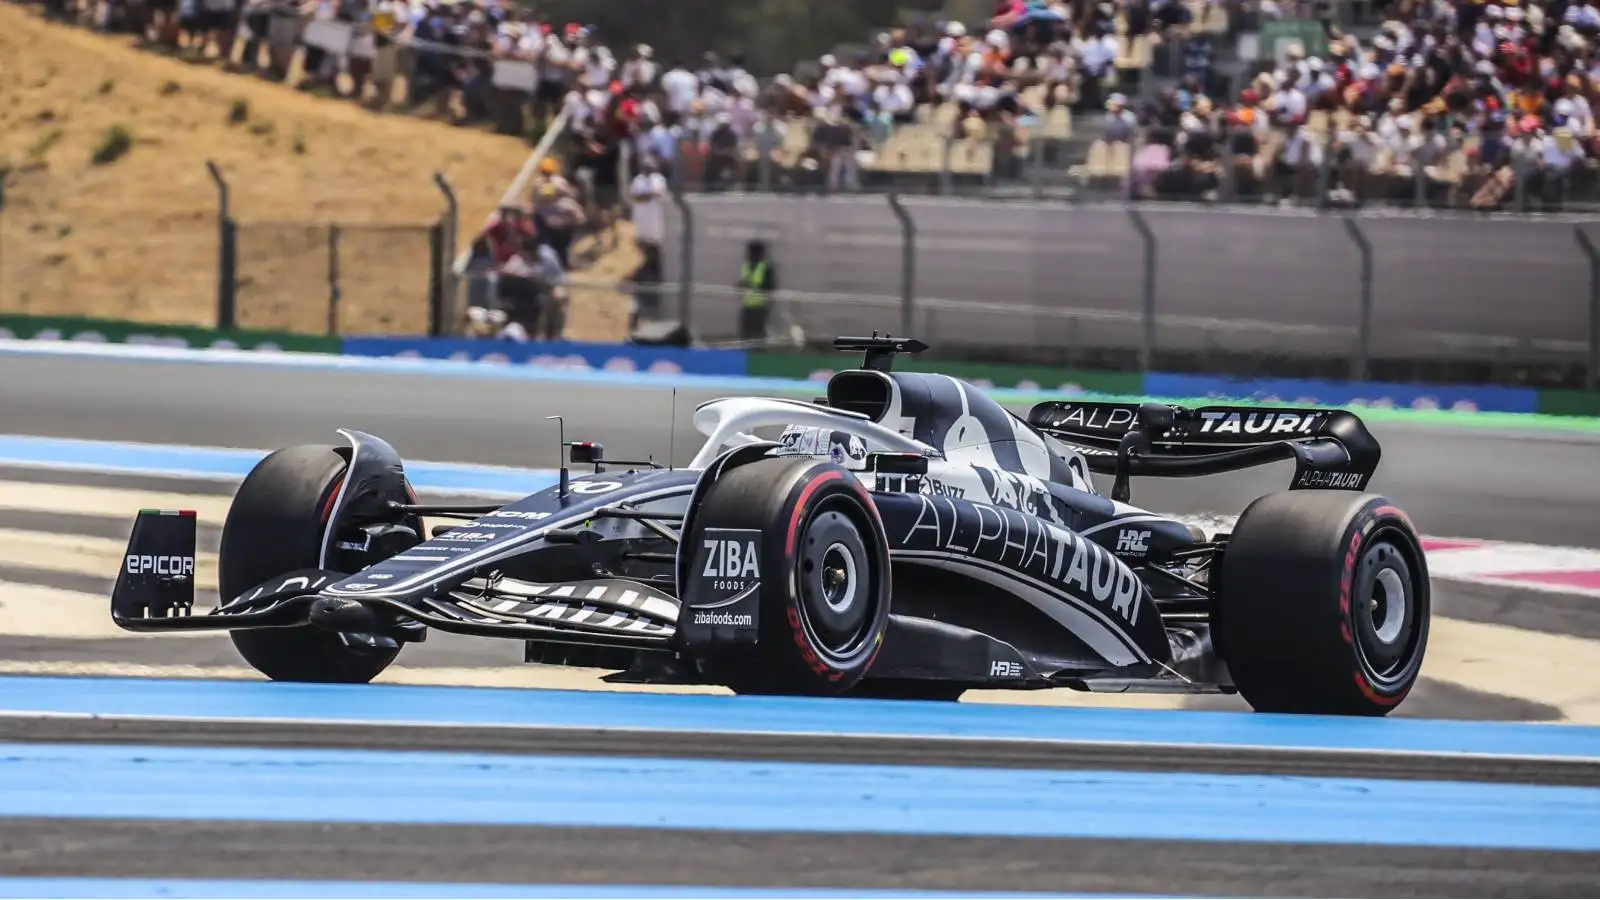 Pierre Gasly driving the upgraded AlphaTauri AT03 at Paul Ricard. France, July 2022.